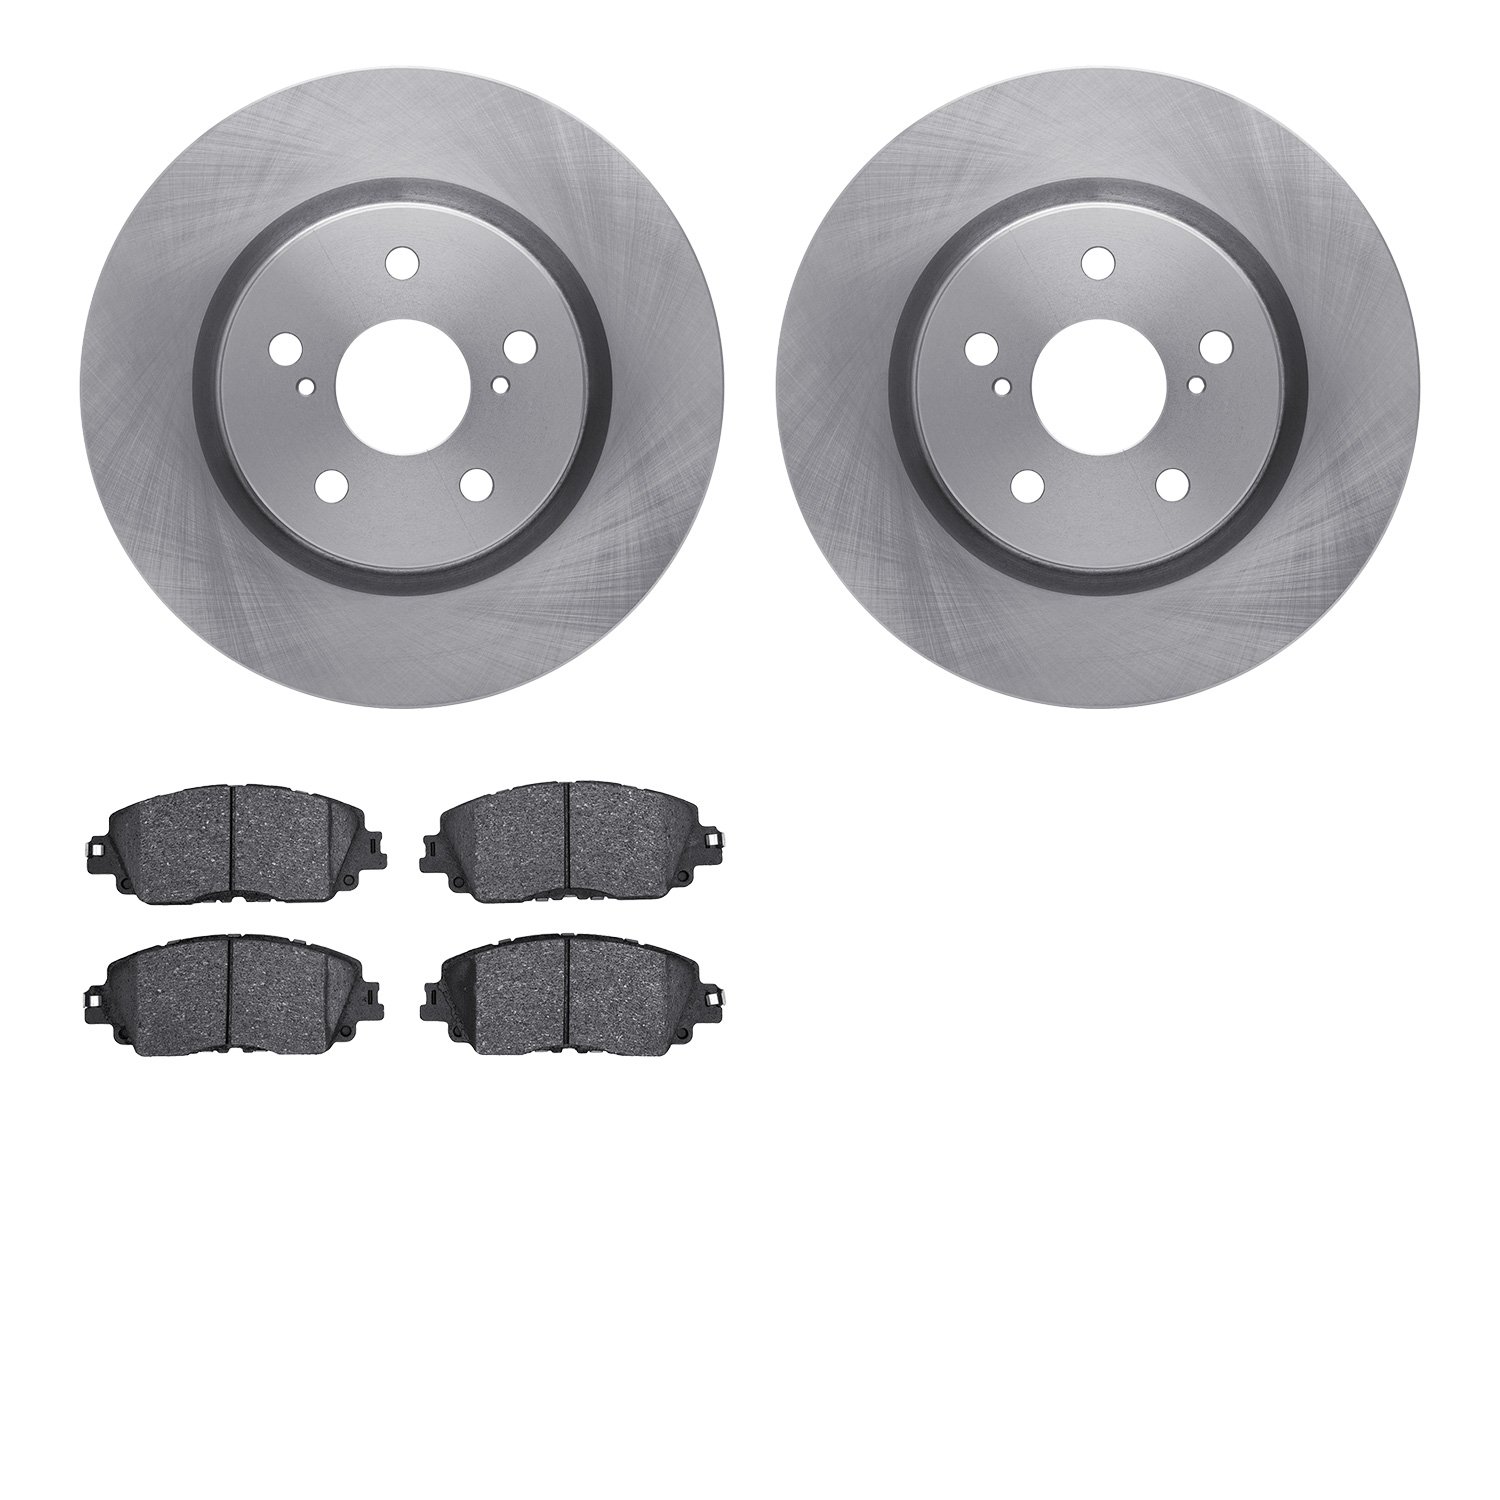 6302-76184 Brake Rotors with 3000-Series Ceramic Brake Pads Kit, Fits Select Lexus/Toyota/Scion, Position: Front